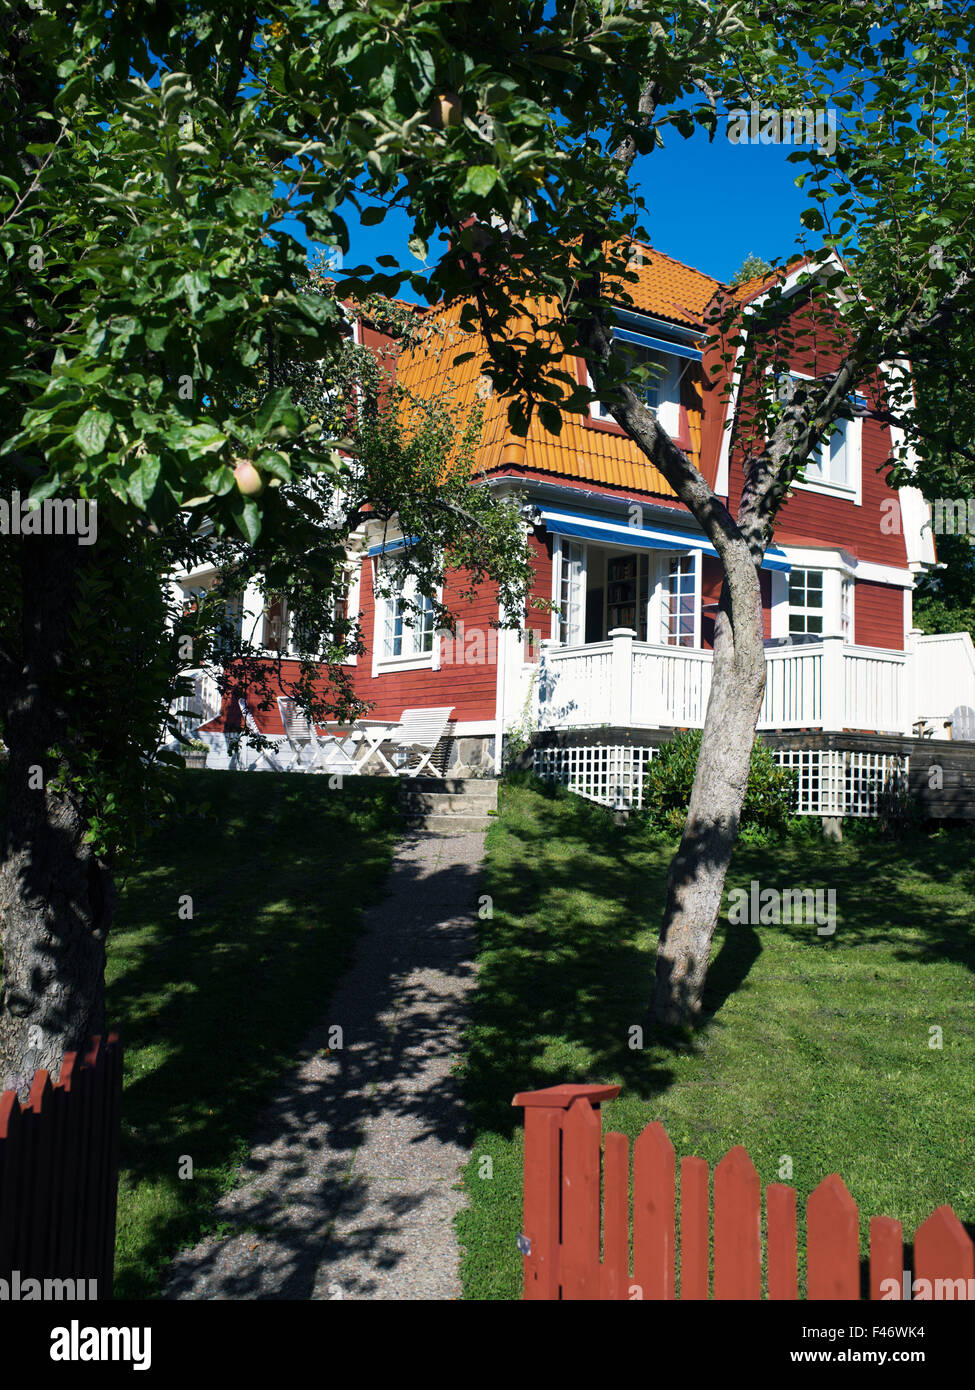 A red house in a garden, Sweden. Stock Photo